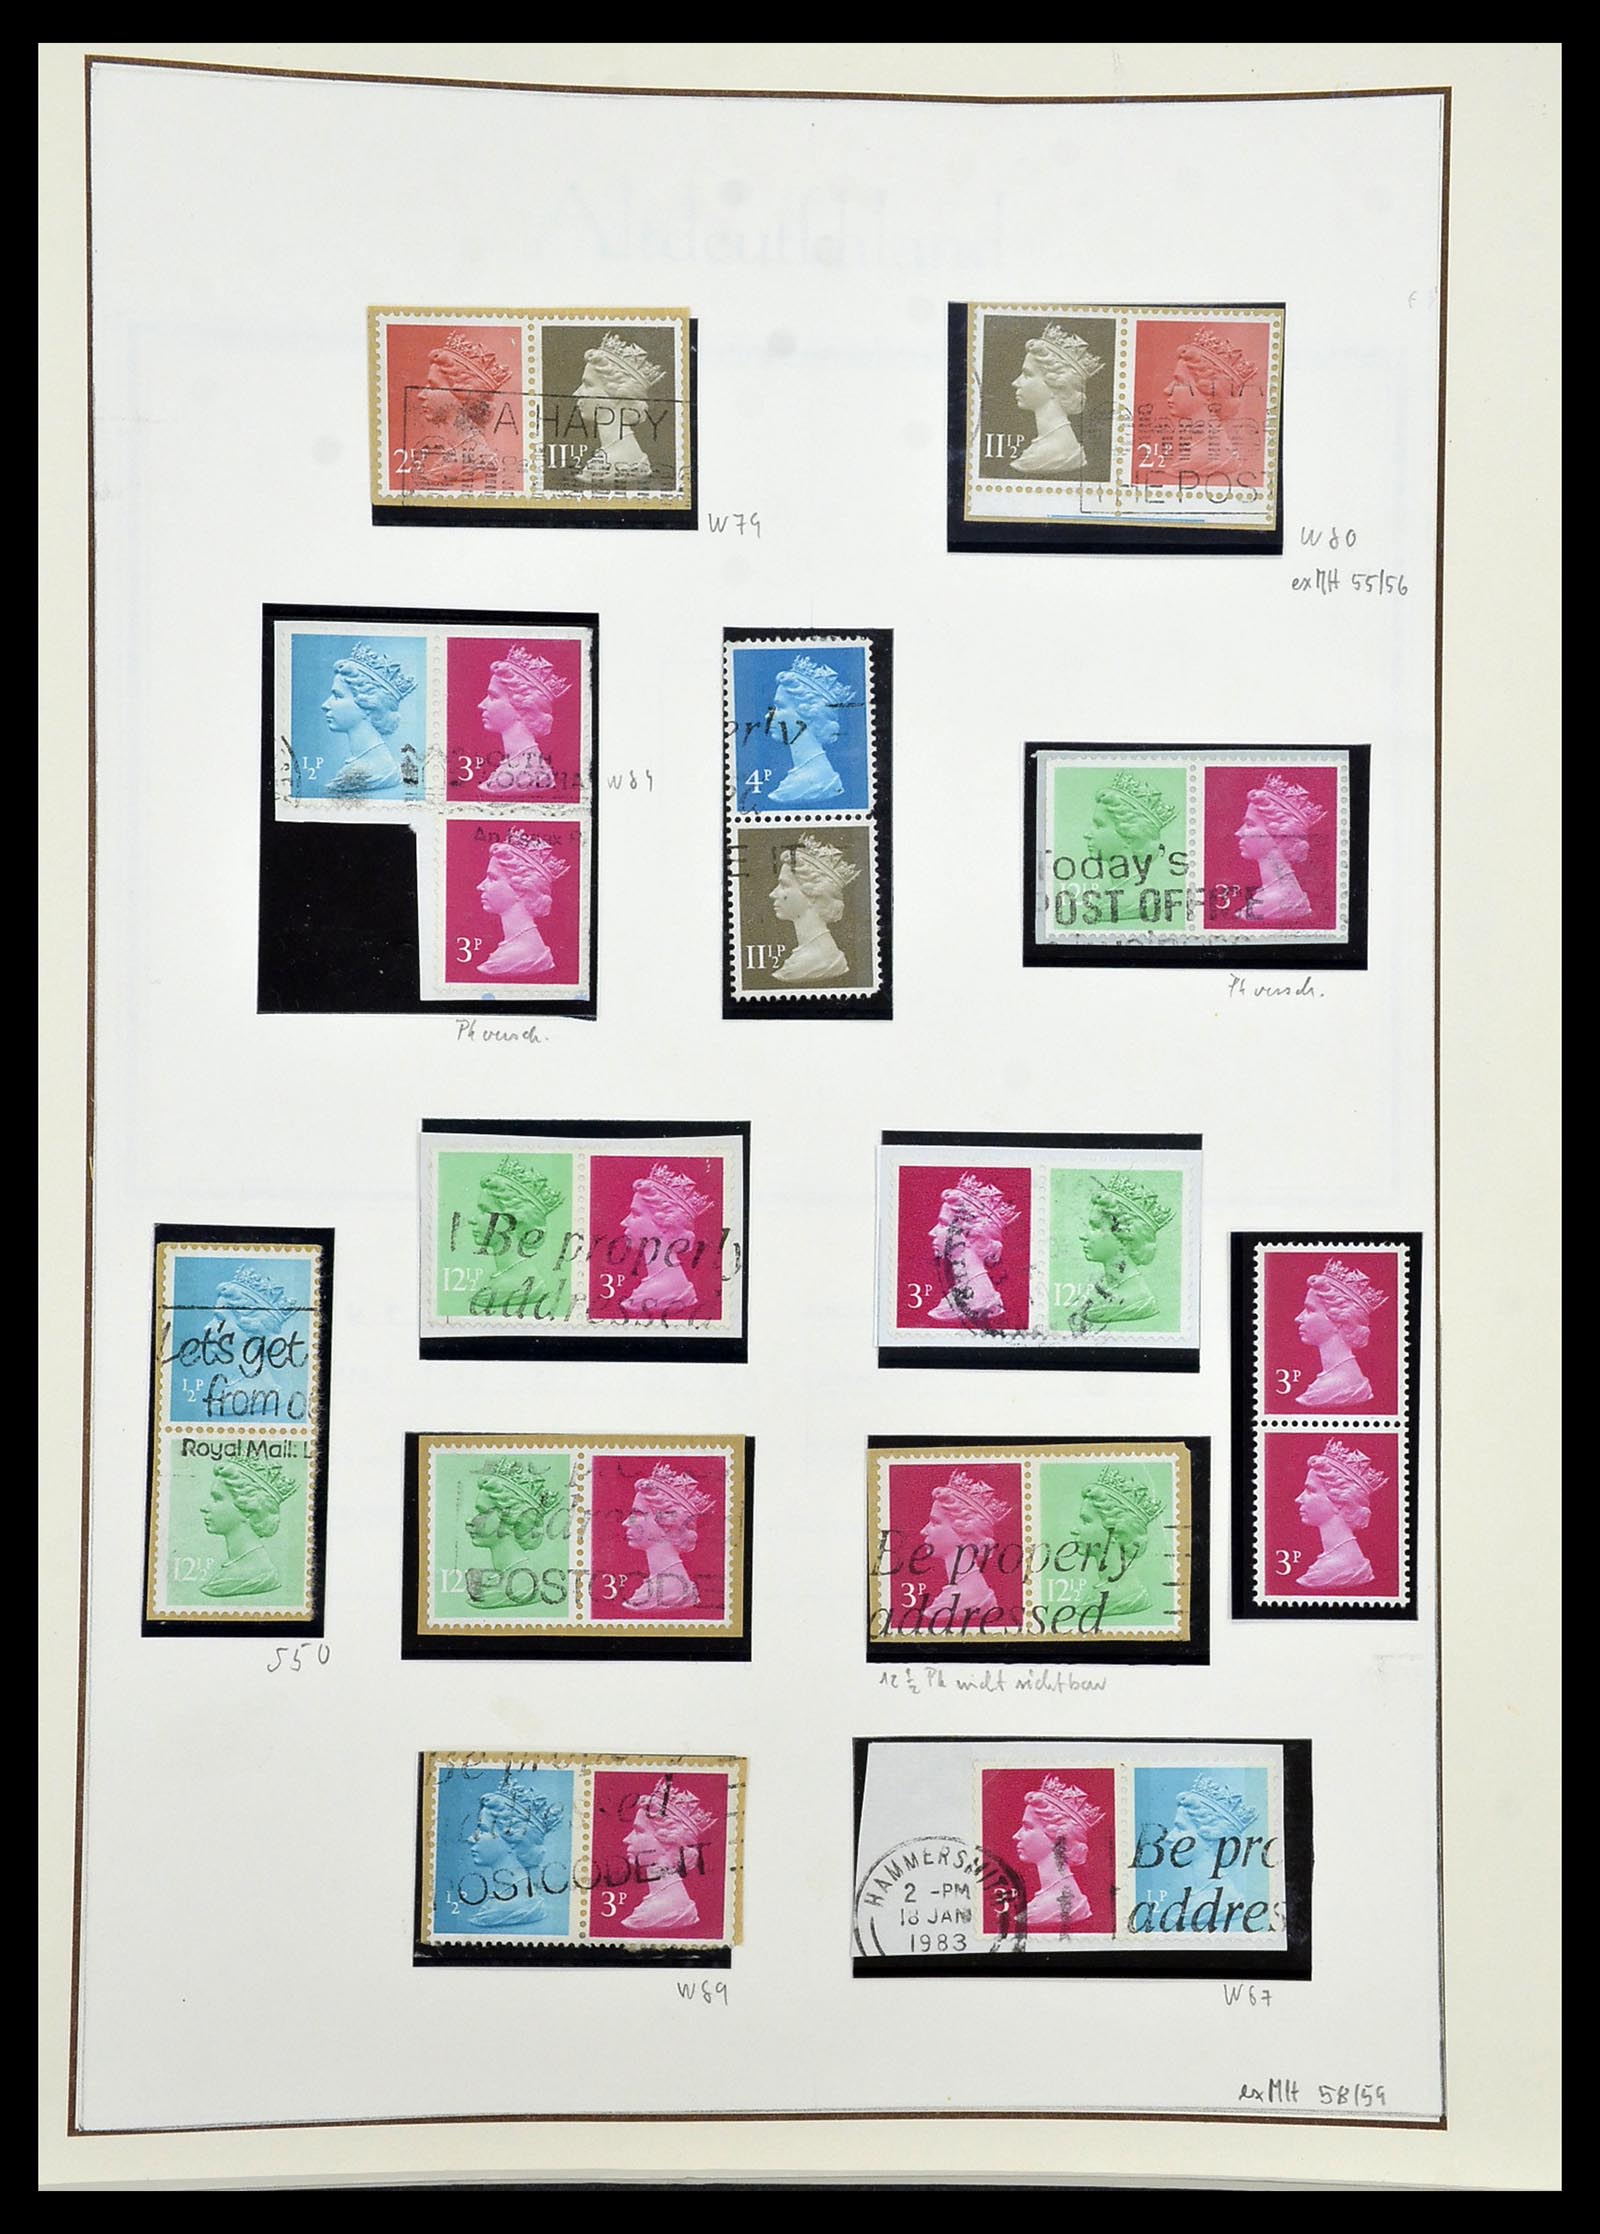 34221 200 - Stamp collection 34221 Great Britain Machins/castles 1971-2005.